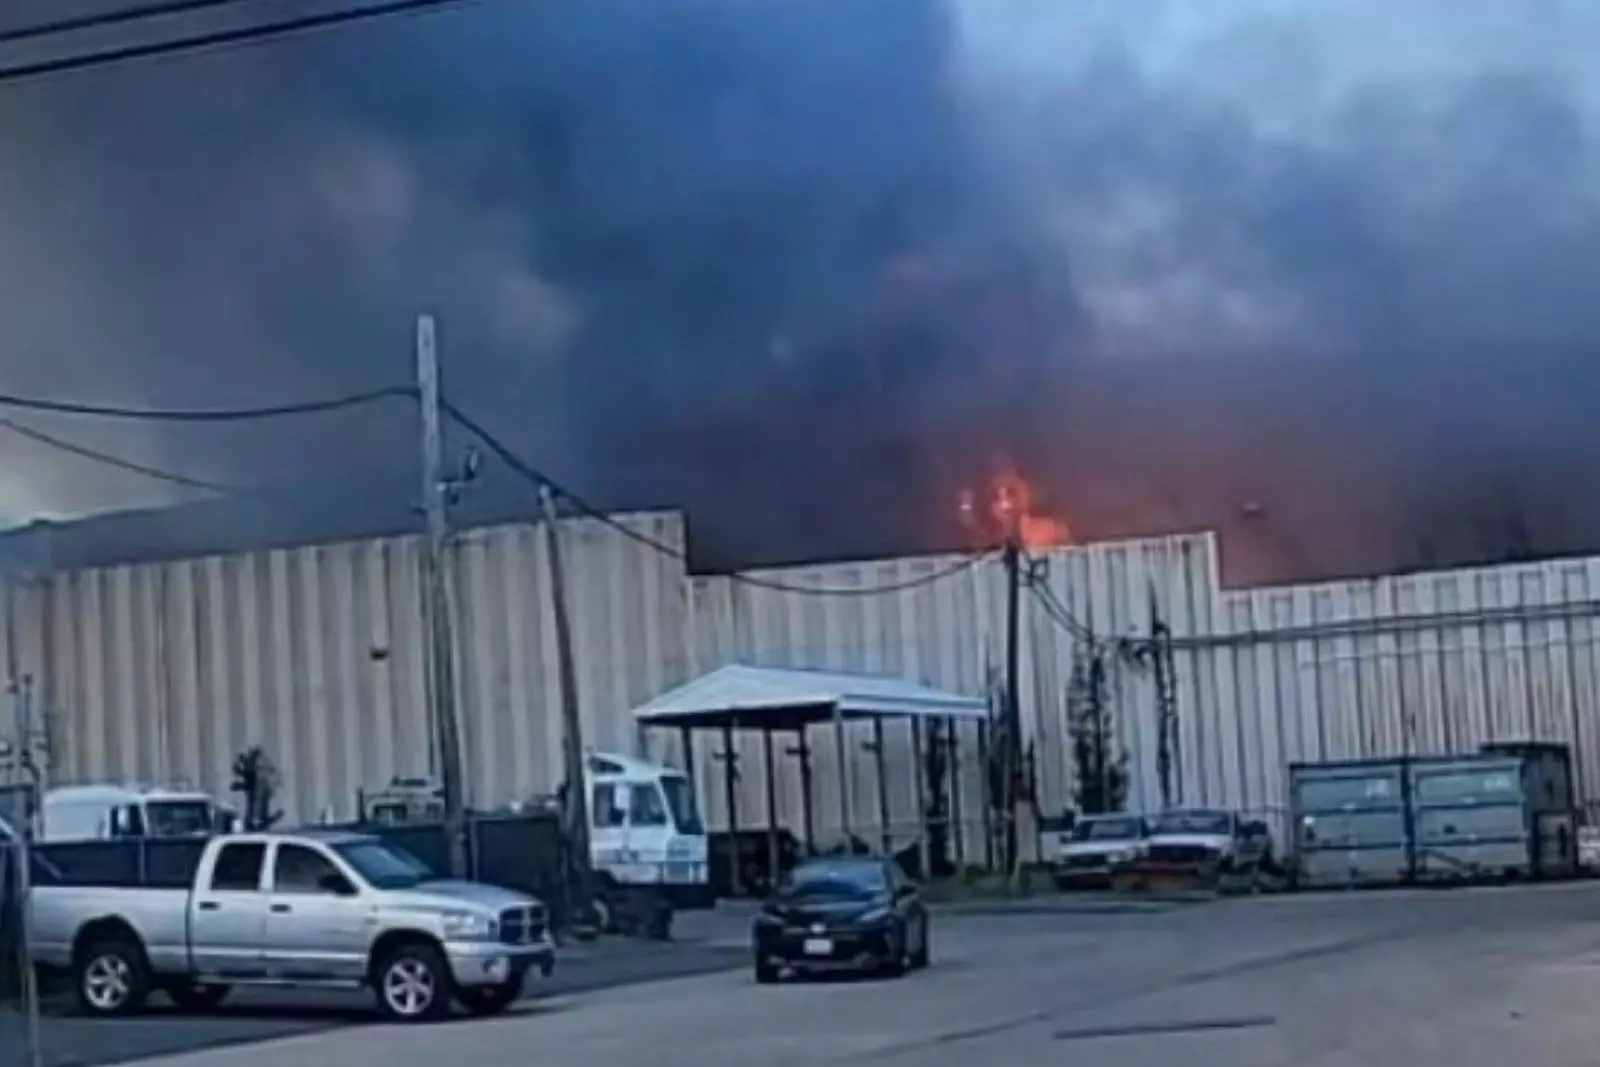 Thick smoke from fires at Elizabeth, NJ waste facilities